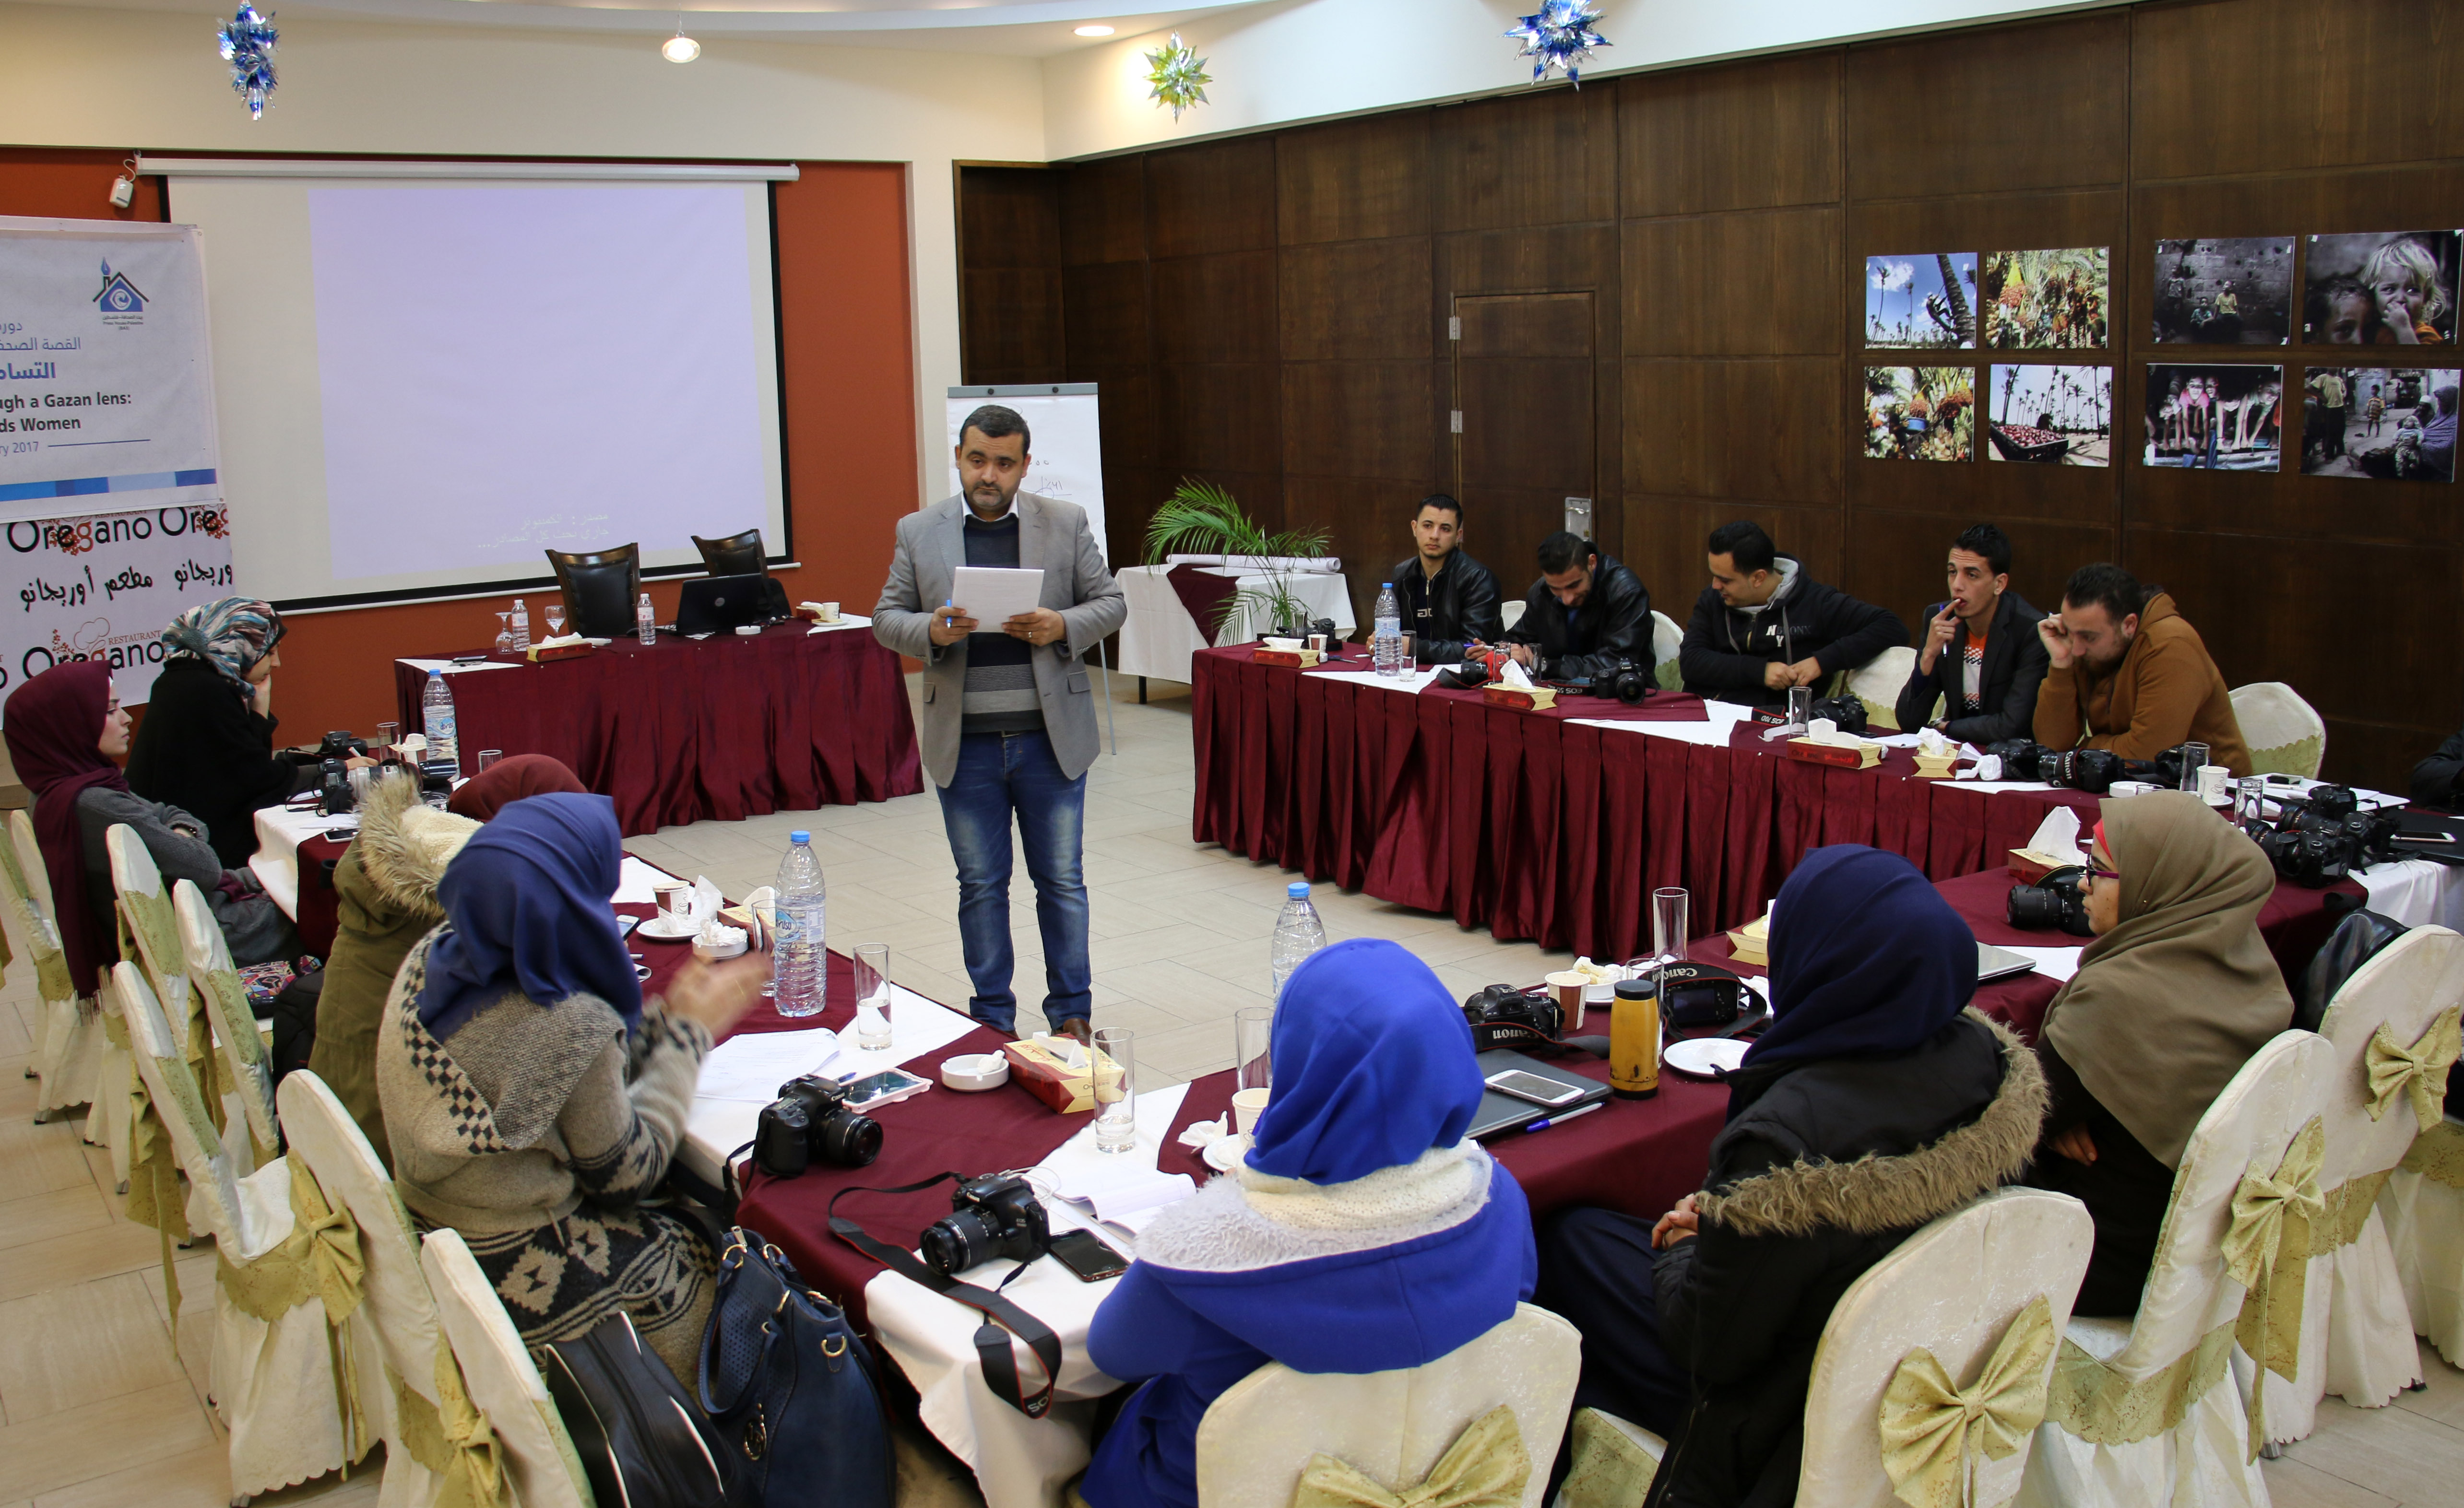 Press House concludes a Training Course on Visual Storytelling